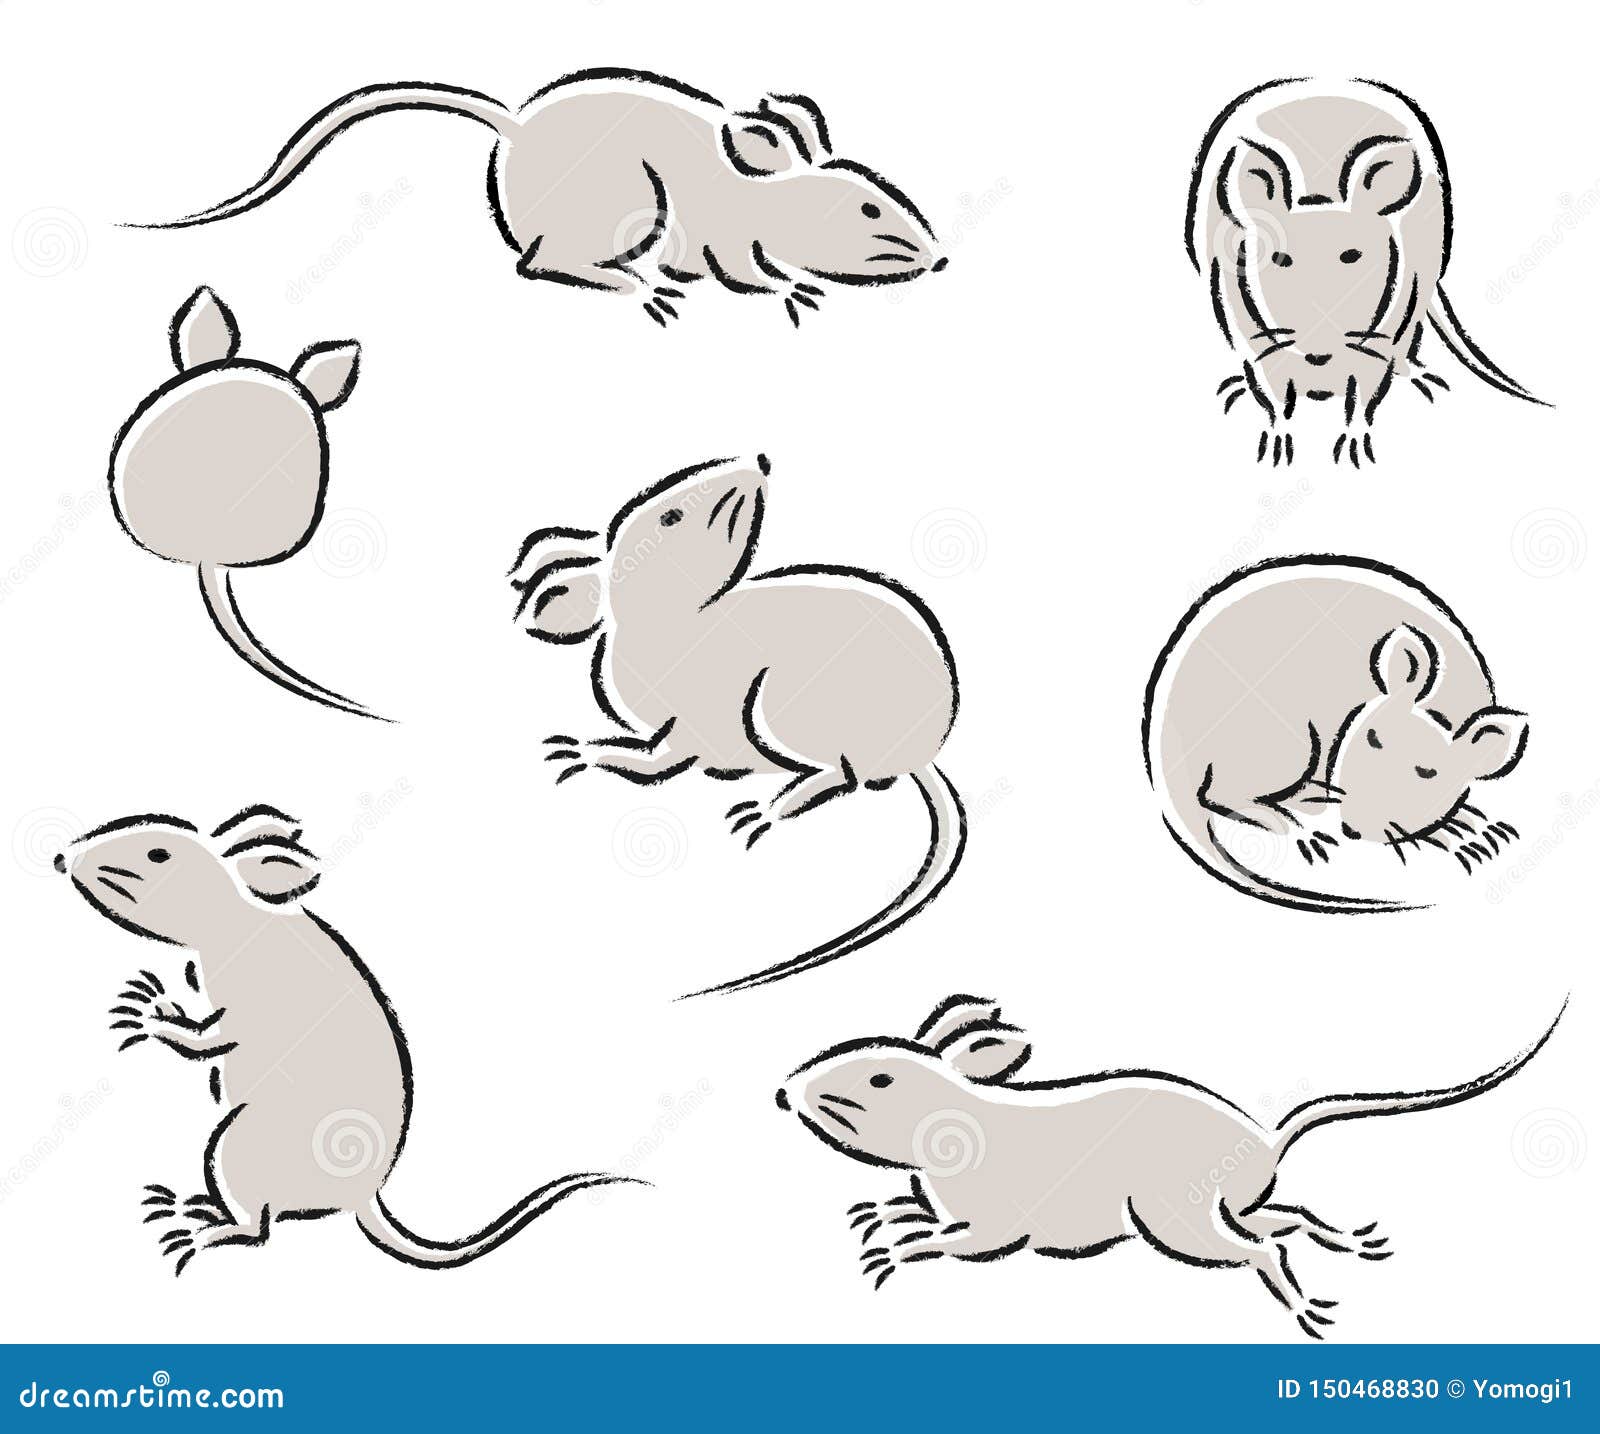 Easy Mouse Drawing - Free Transparent PNG Clipart Images Download